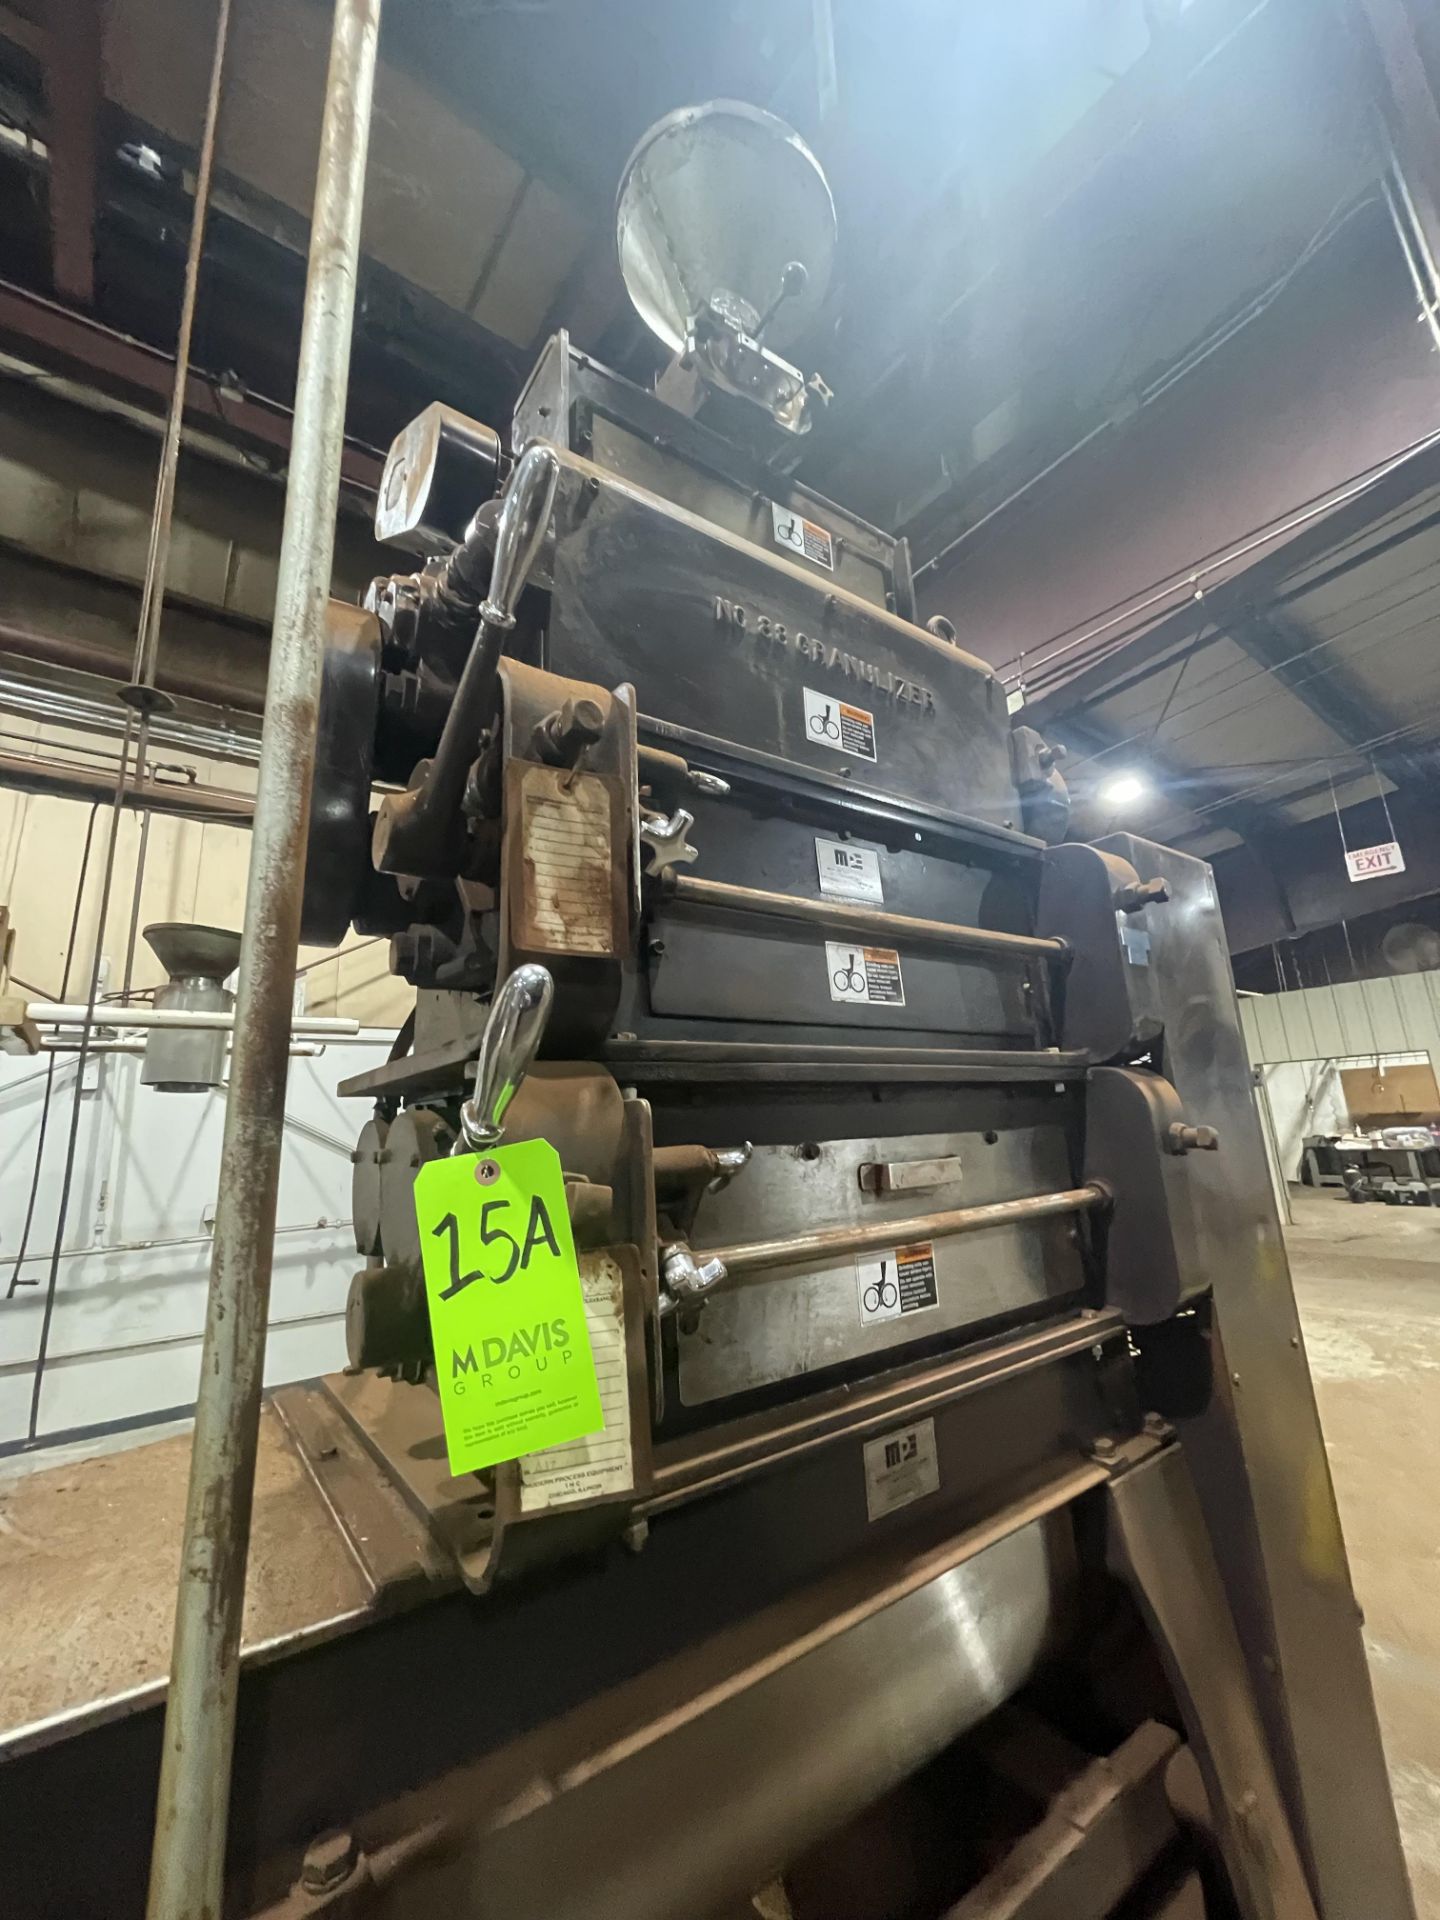 GUMP / MODERN PROCESS EQUIPMENT 3-HEAD COFFEE ROLLER GRINDER / GRANULIZER, MODEL 888, E-STYLE - Image 10 of 24